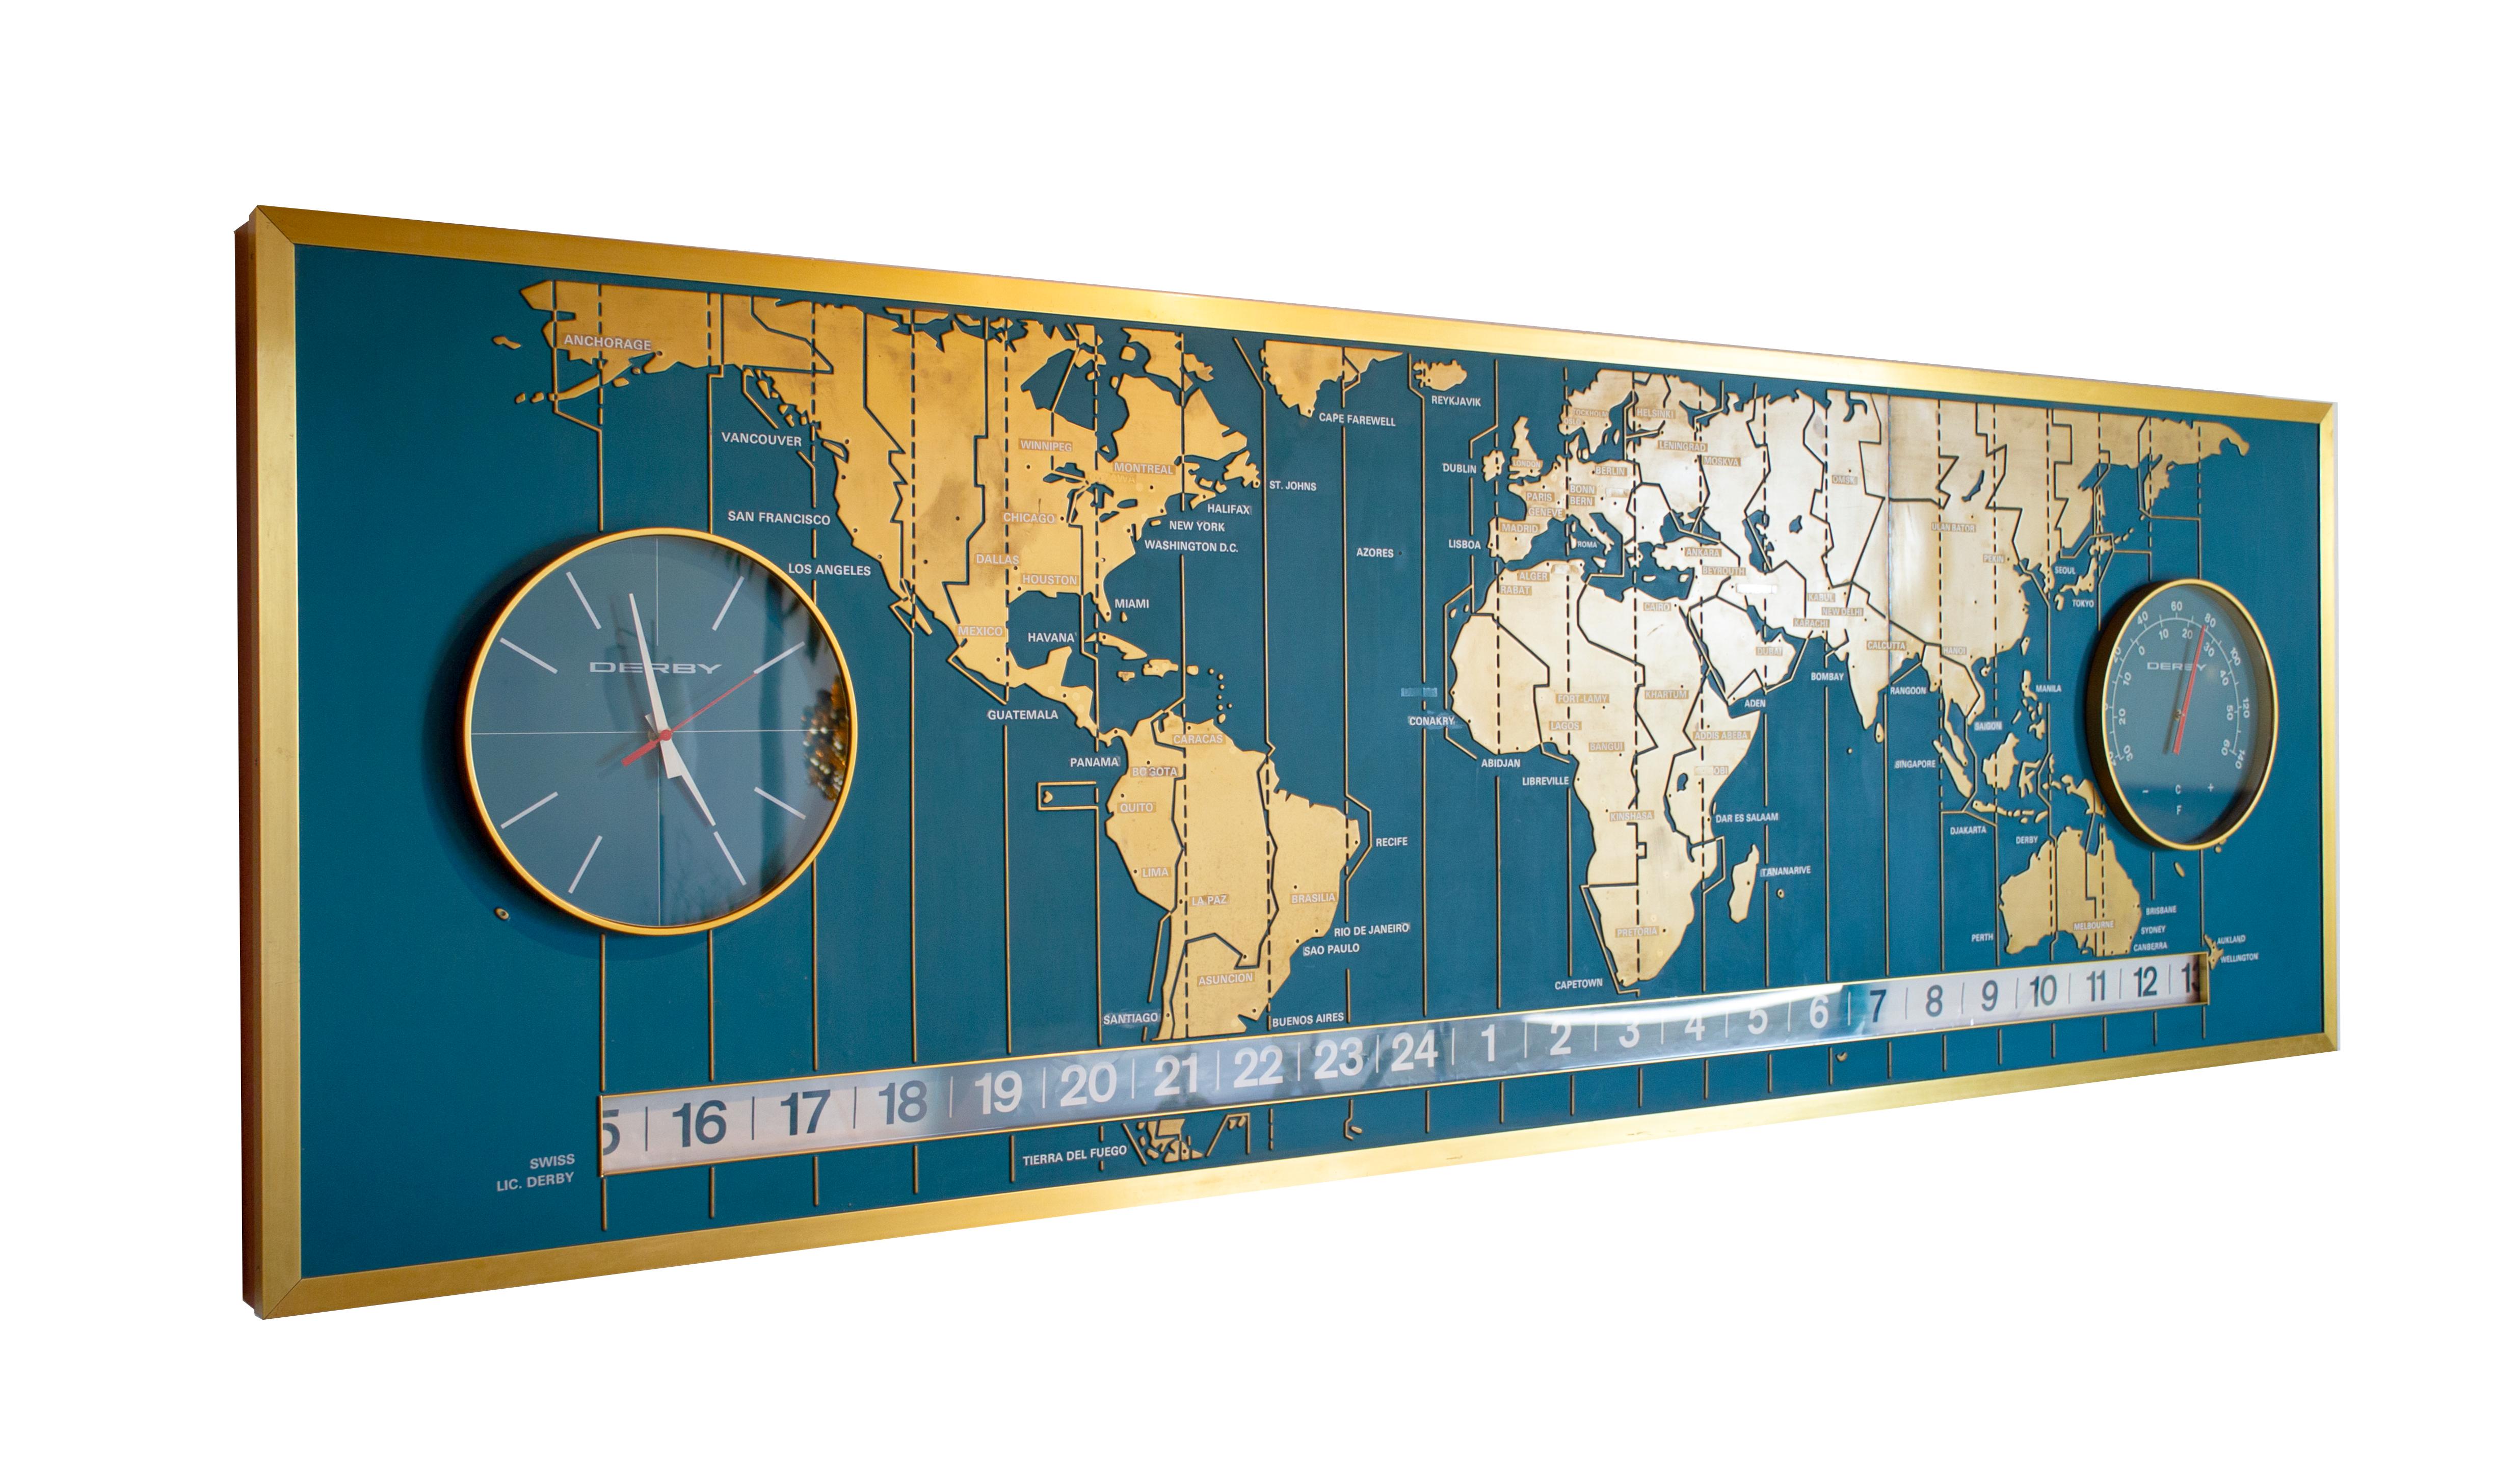 From the Braniff Place World Headquarters in Dallas, Texas comes this massive, one of a kind low-relief 9’ world map. It has a functional Derby Clock on the left side and a thermometer on the right. The numerical strip at the bottom is a functional